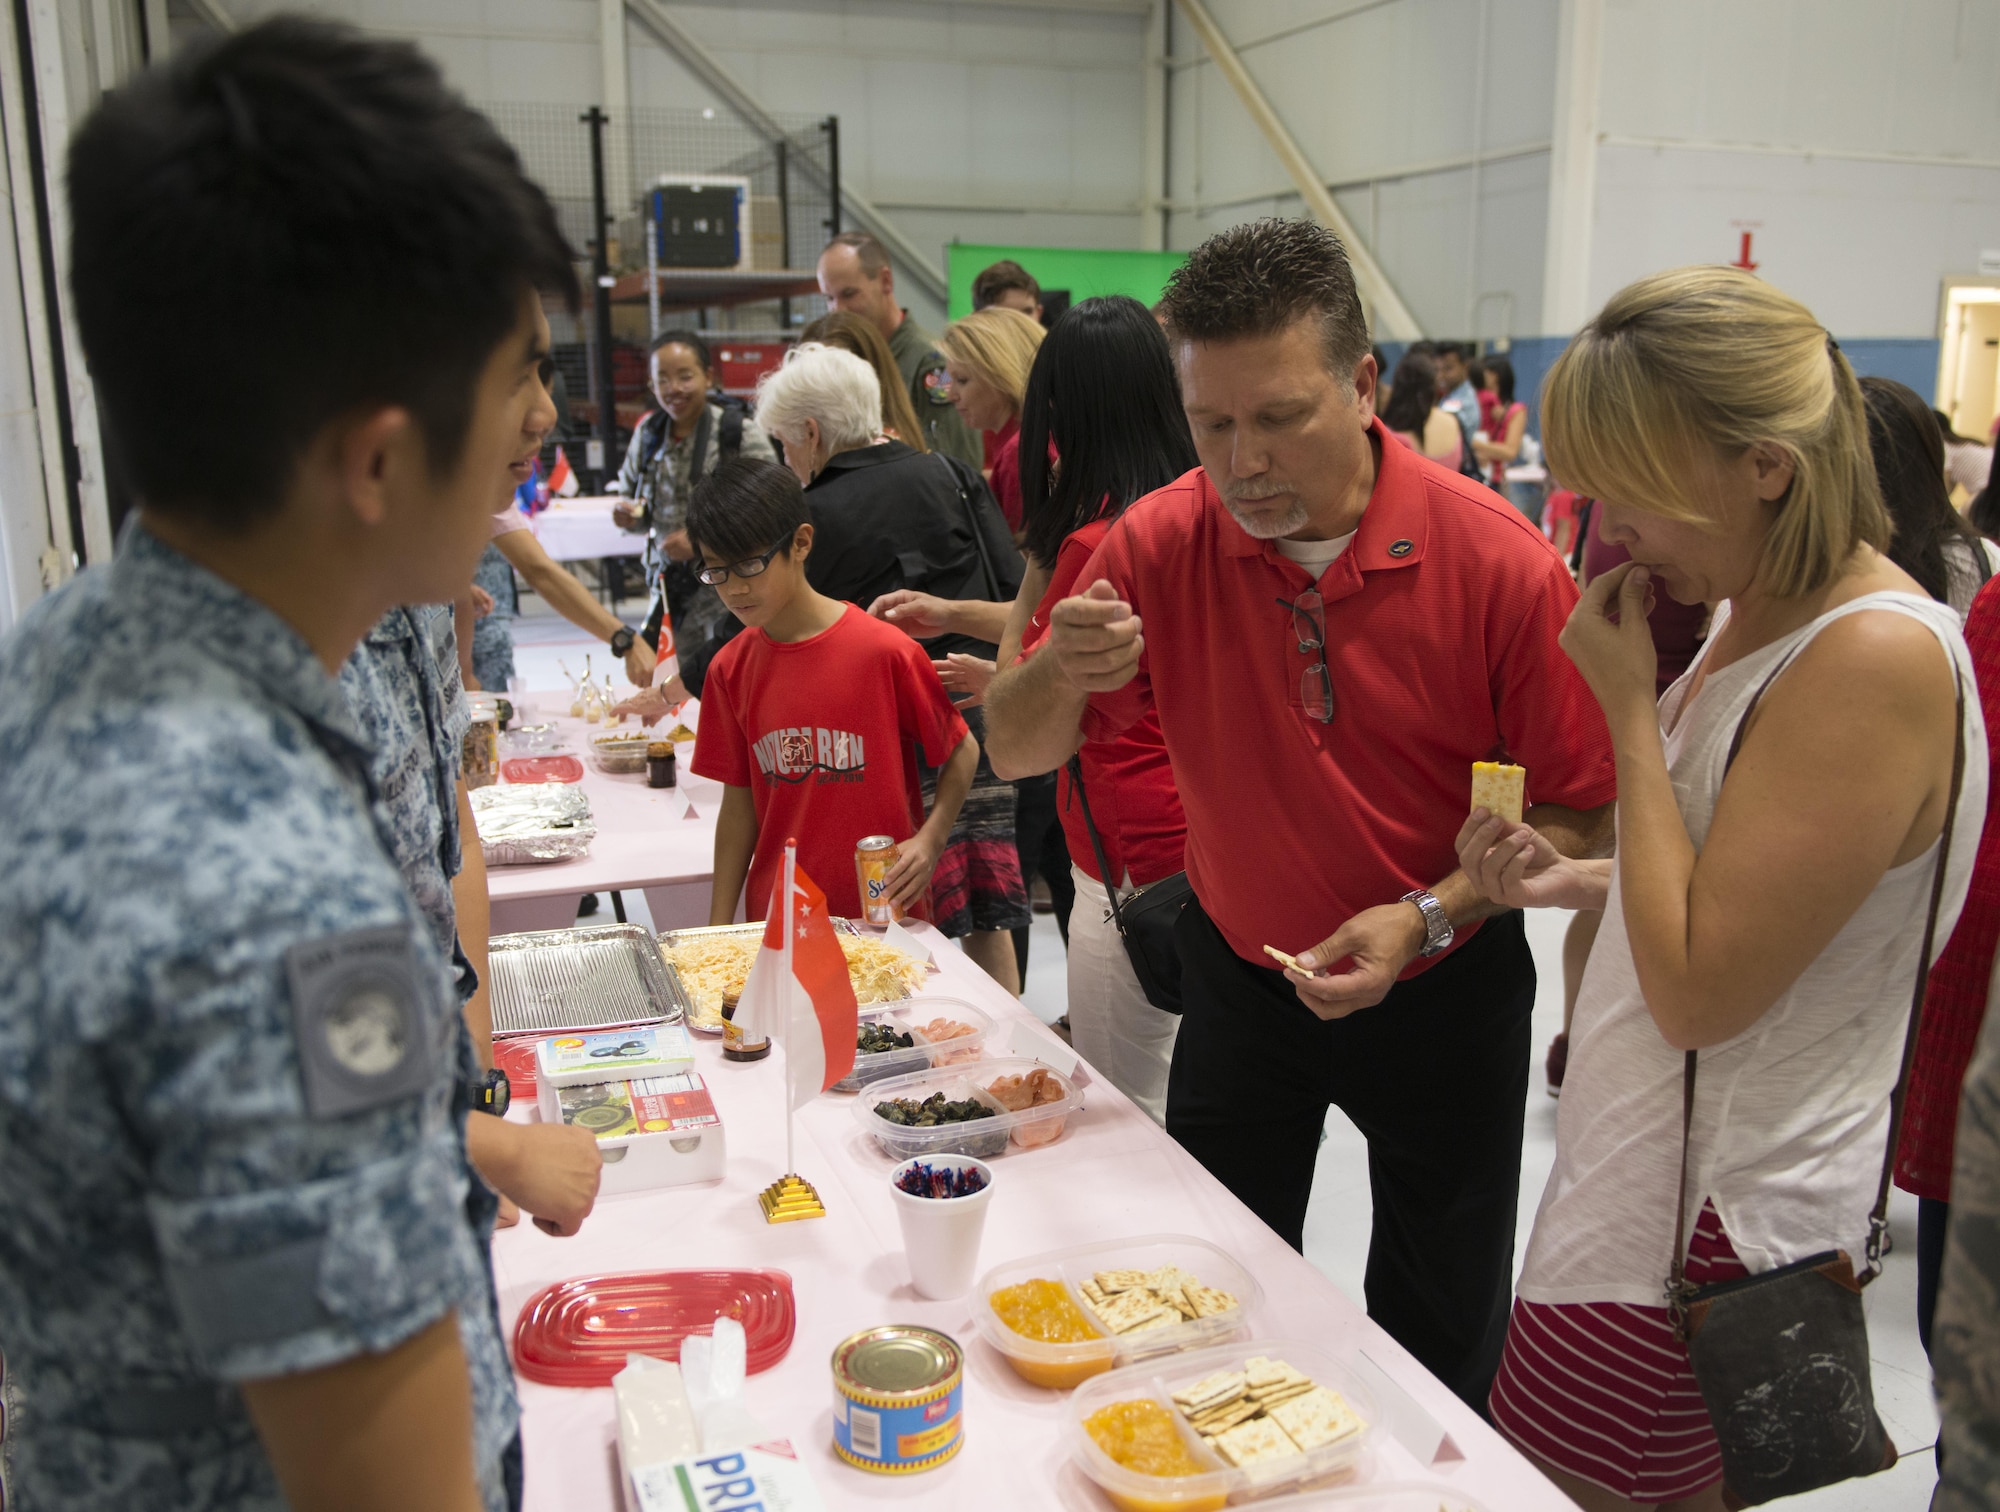 Volunteers serve various Singaporean foods to National Day celebration attendees August 5, 2016, at Mountain Home AFB, Idaho. Prior to a celebration dinner, Singaporean service members hosted several display booths where guests could play Singaporean games, sample authentic cuisine and learn about squadron accomplishments from the past year. (U.S. Air Force photo by 2nd Lt. Kippun Sumner/Released)